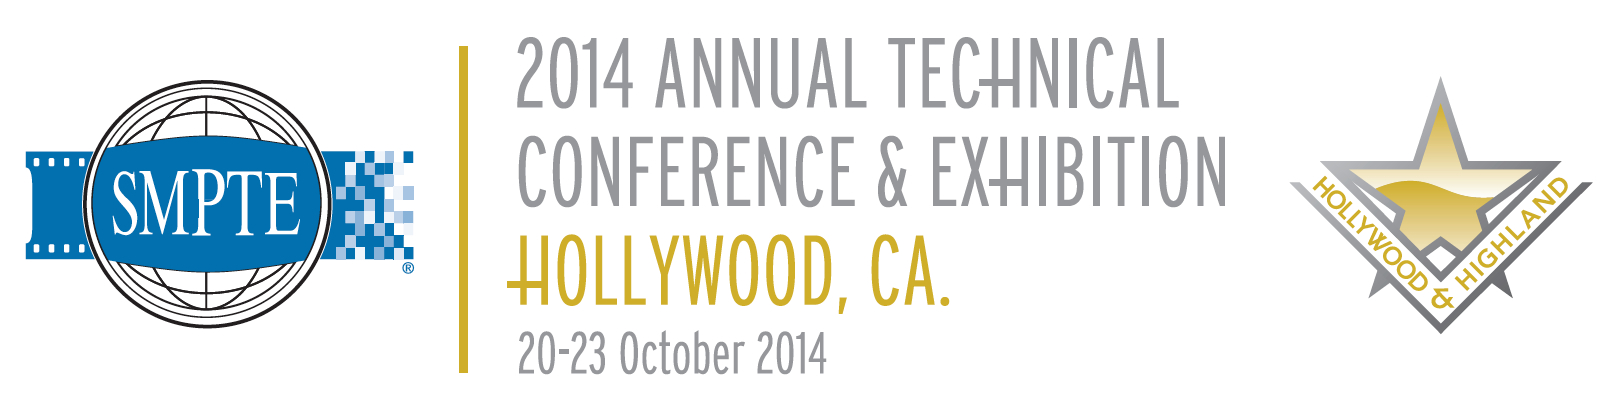 SMPTE 2014 Annual Technical Conference & Exhibition Logo